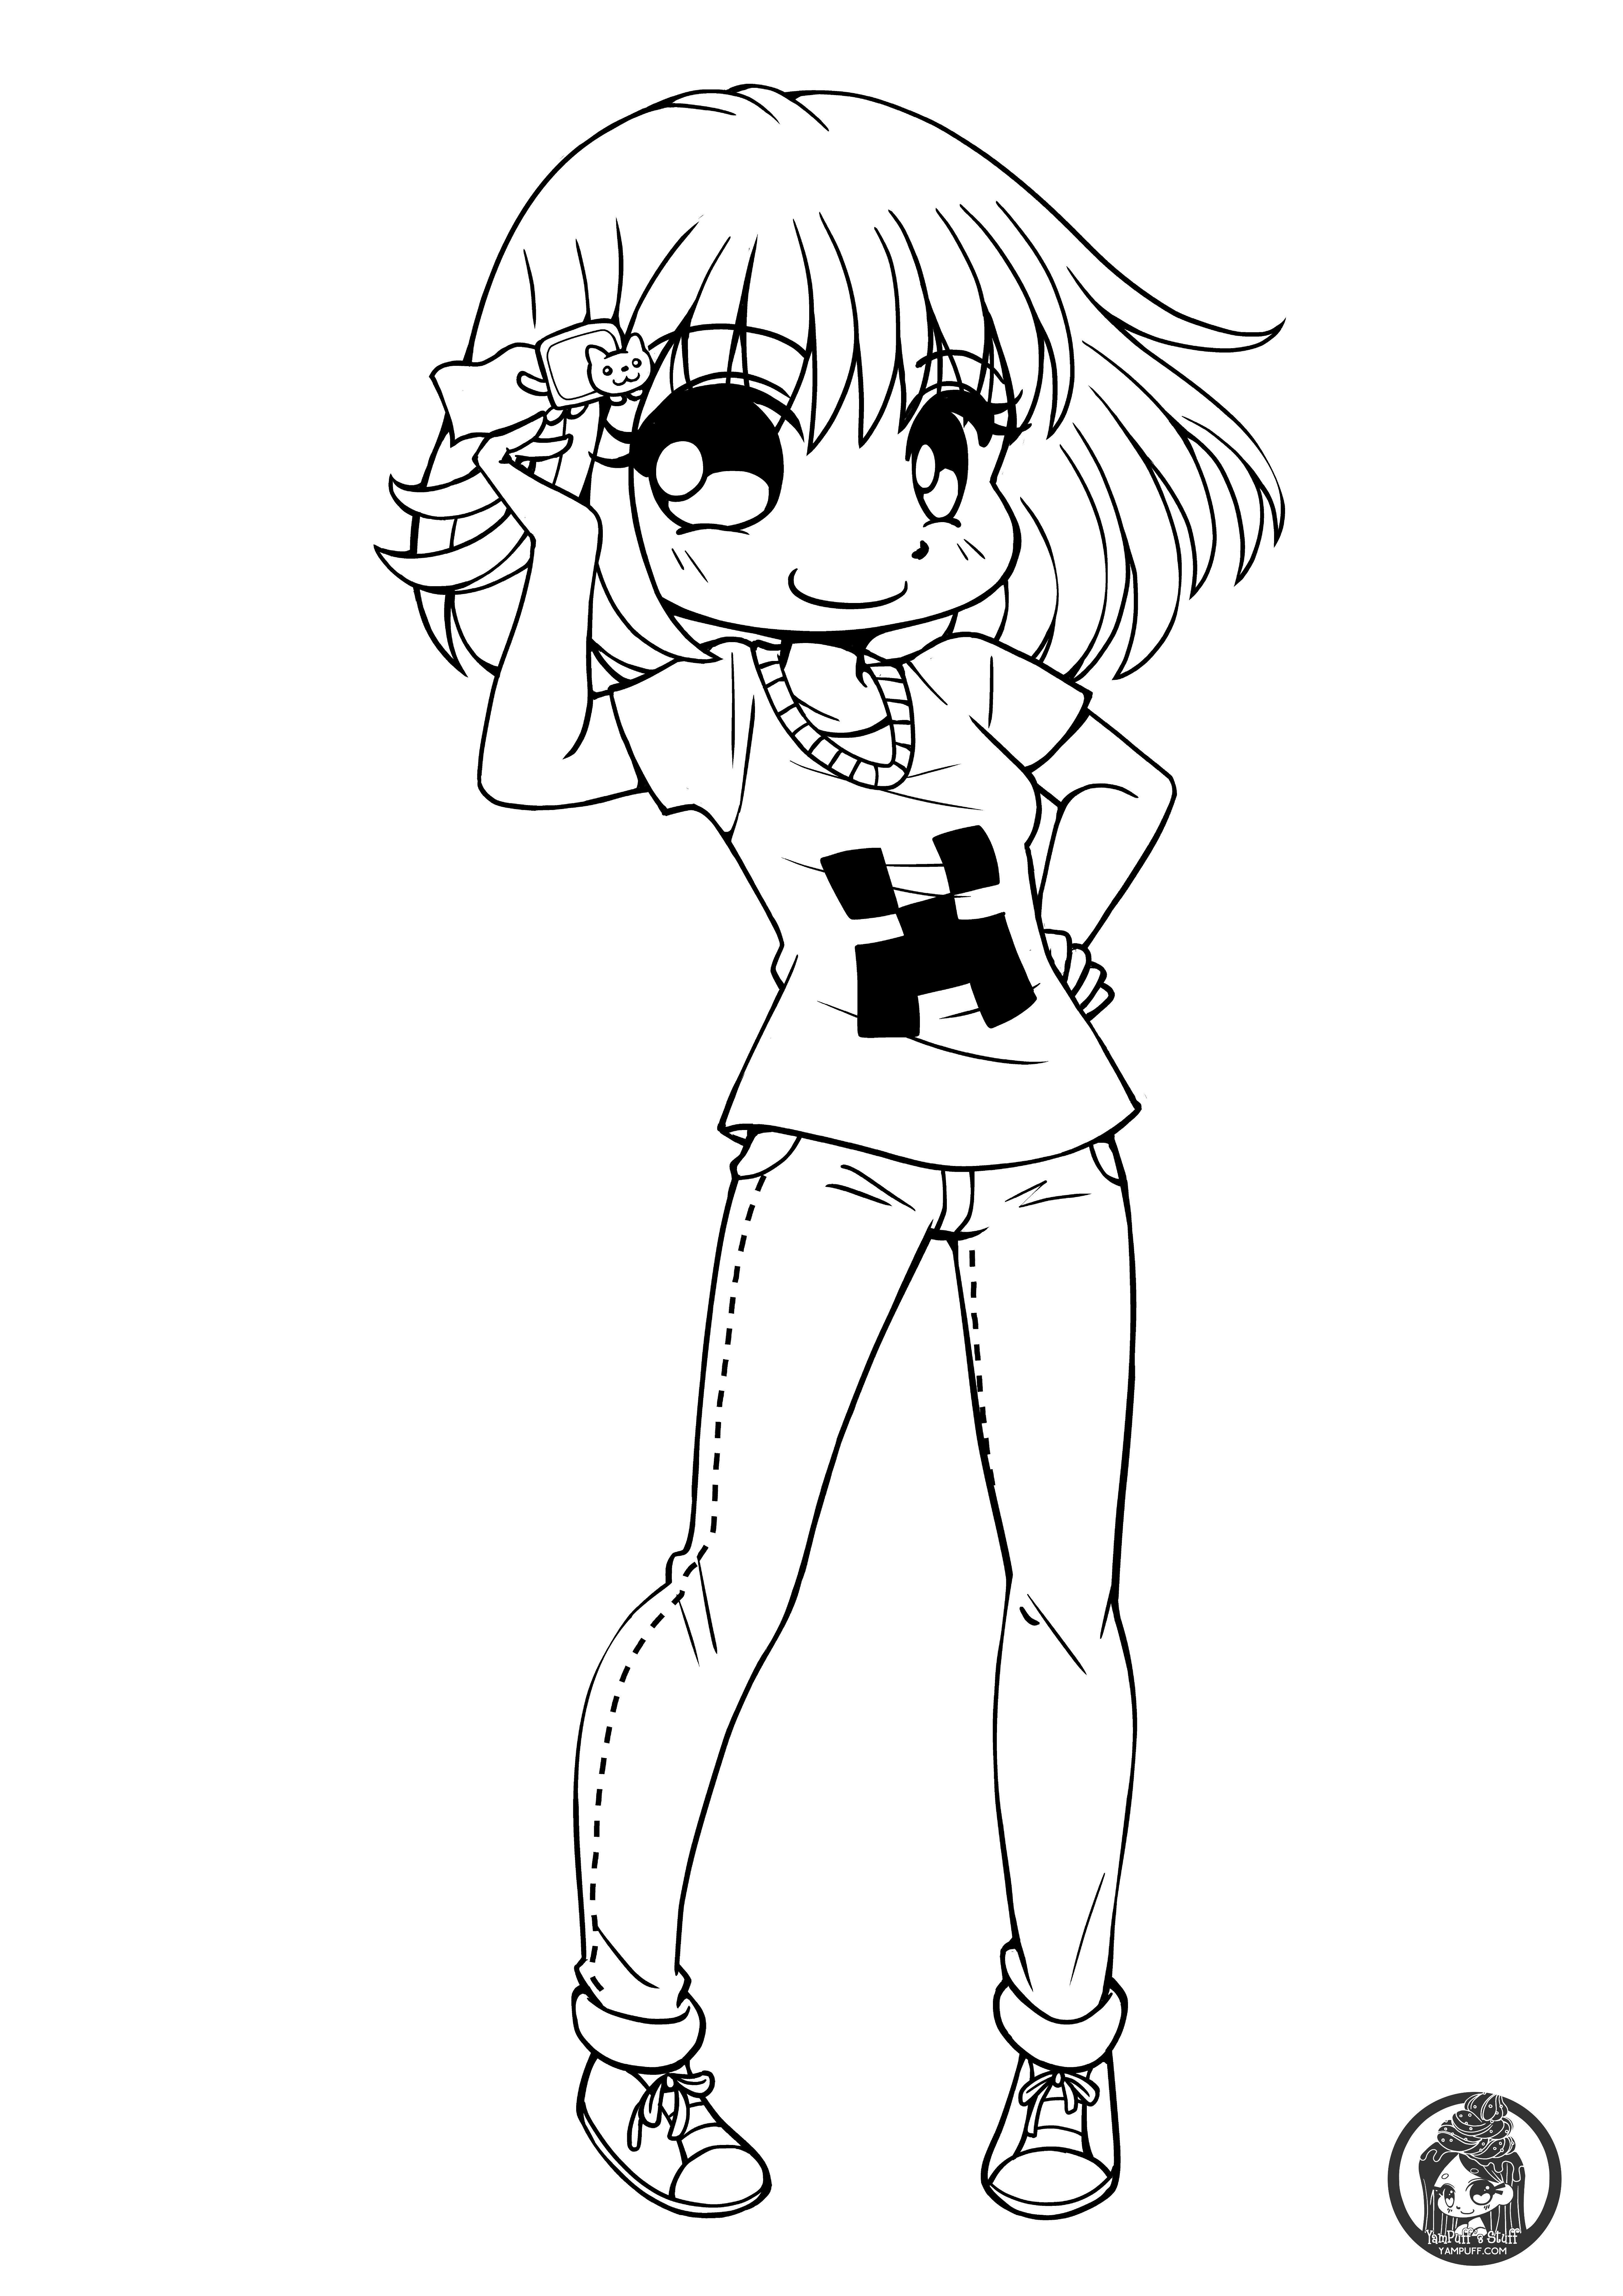 Chibi Anime Girl Coloring Pages
 Chibis Free Chibi Coloring Pages • YamPuff s Stuff